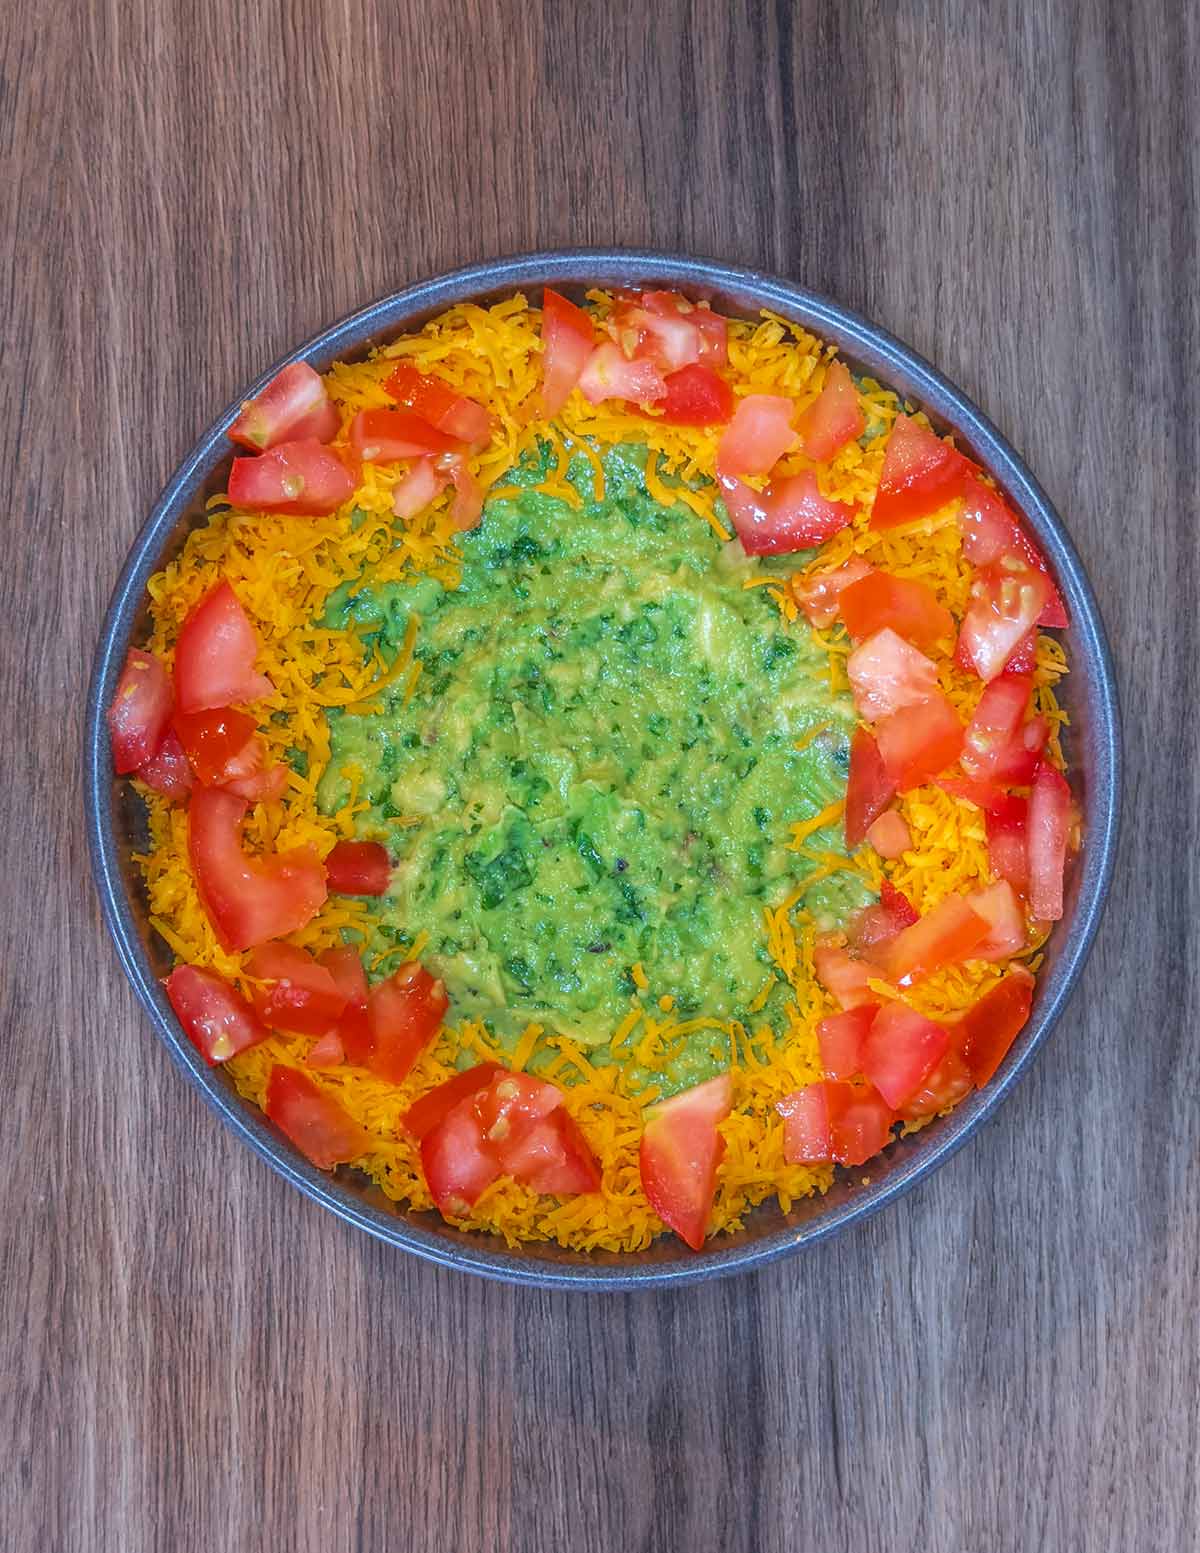 Grated cheese and chopped tomatoes put around the edge of the guacamole.